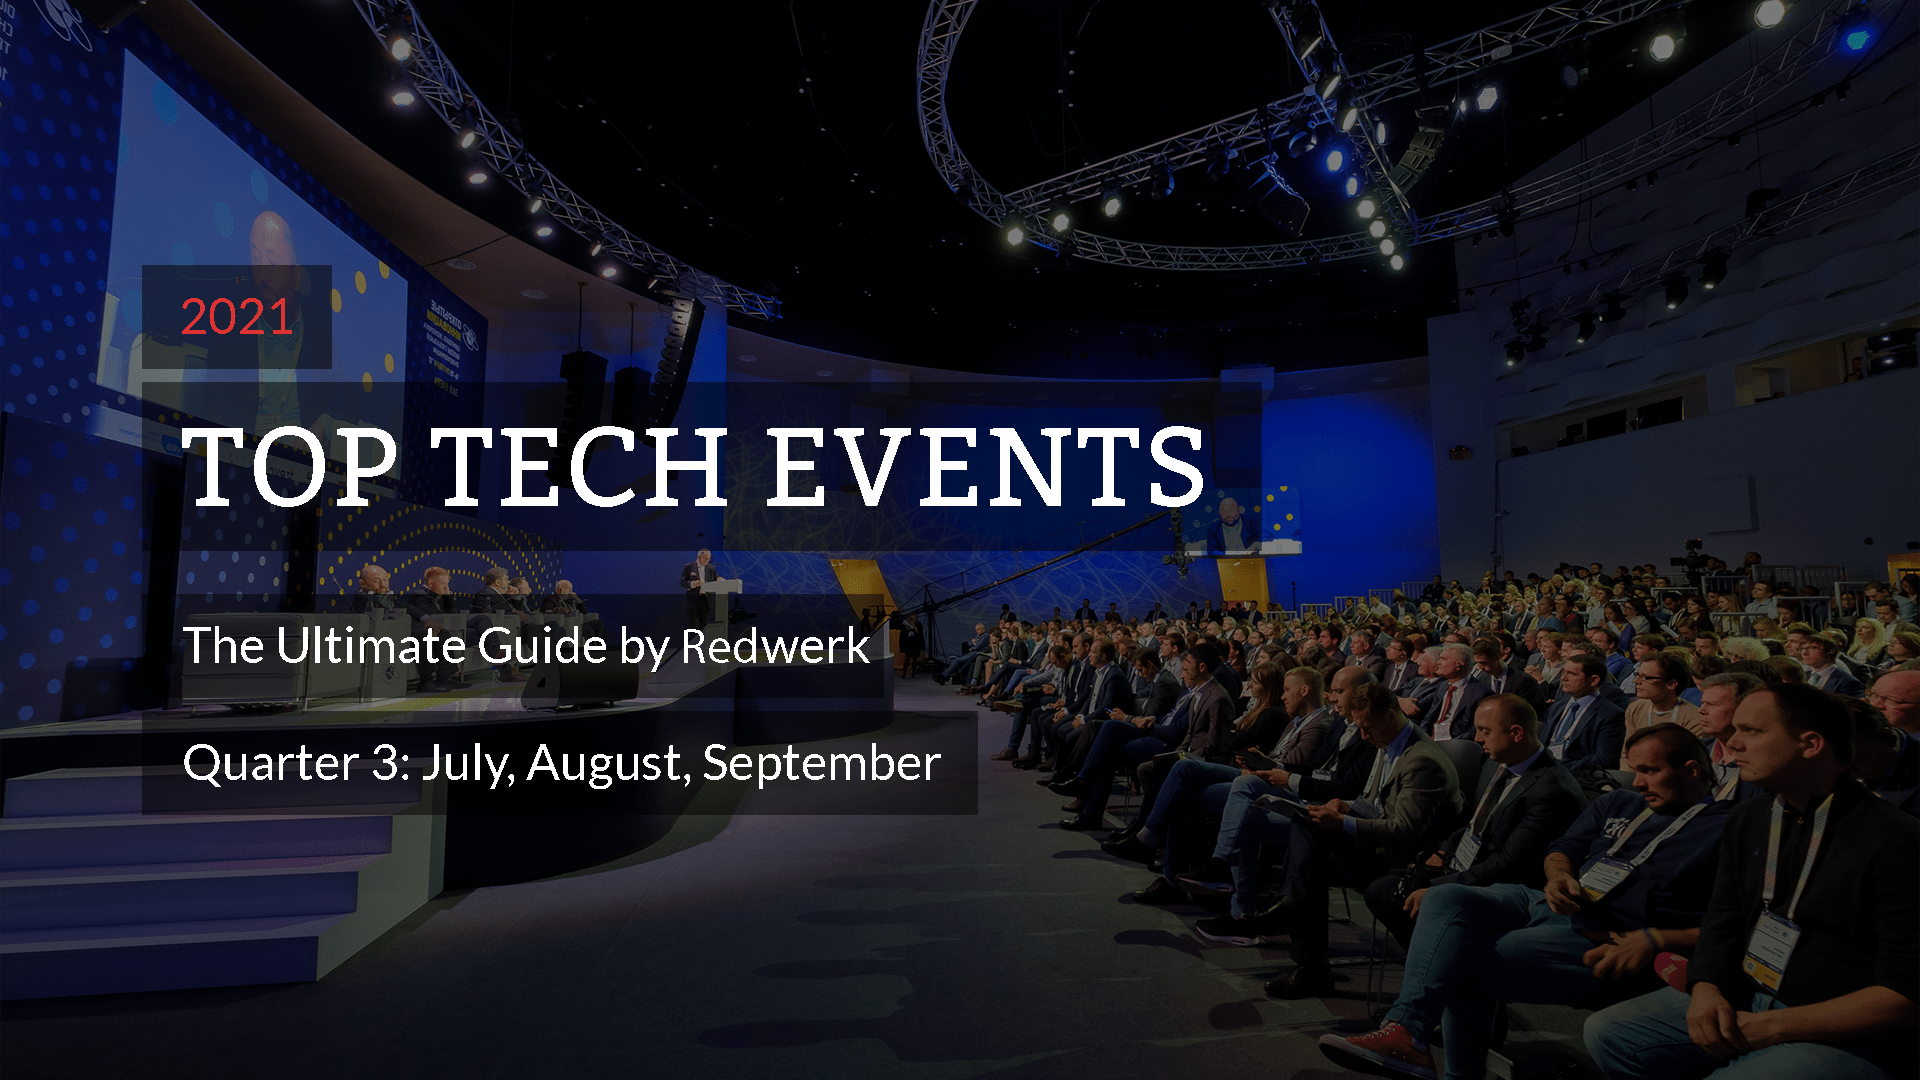 Top Tech Events in 2021: Quarter 3 Ultimate Guide